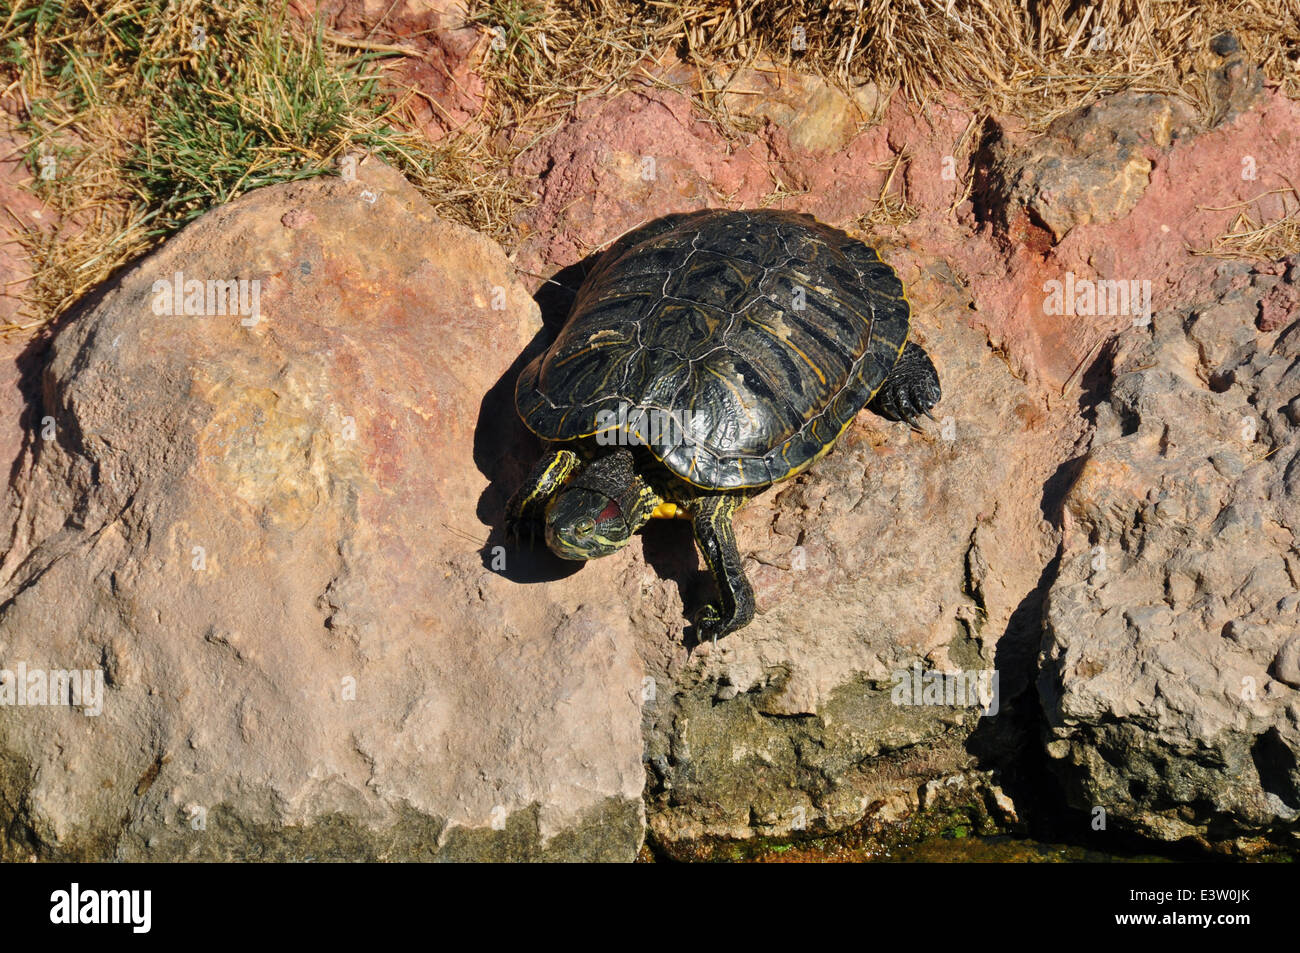 Red eared slider turtle climbing on rocks. Amphibian reptile animal in natural environment. Stock Photo